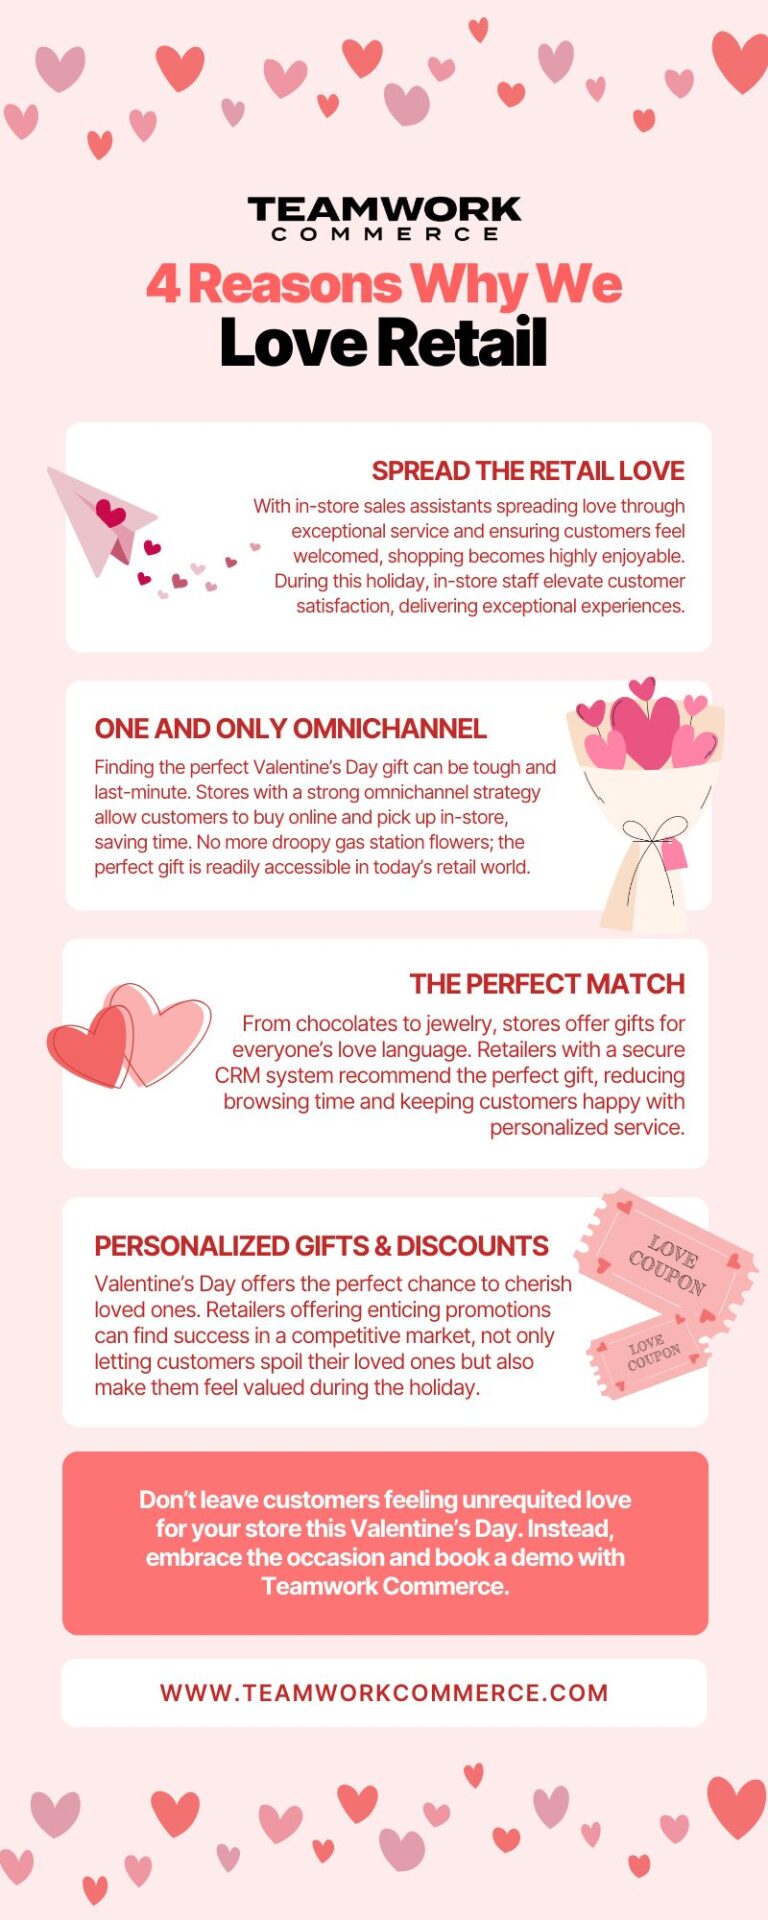 Valentine’s Day: 4 Reasons Why We LOVE Retail